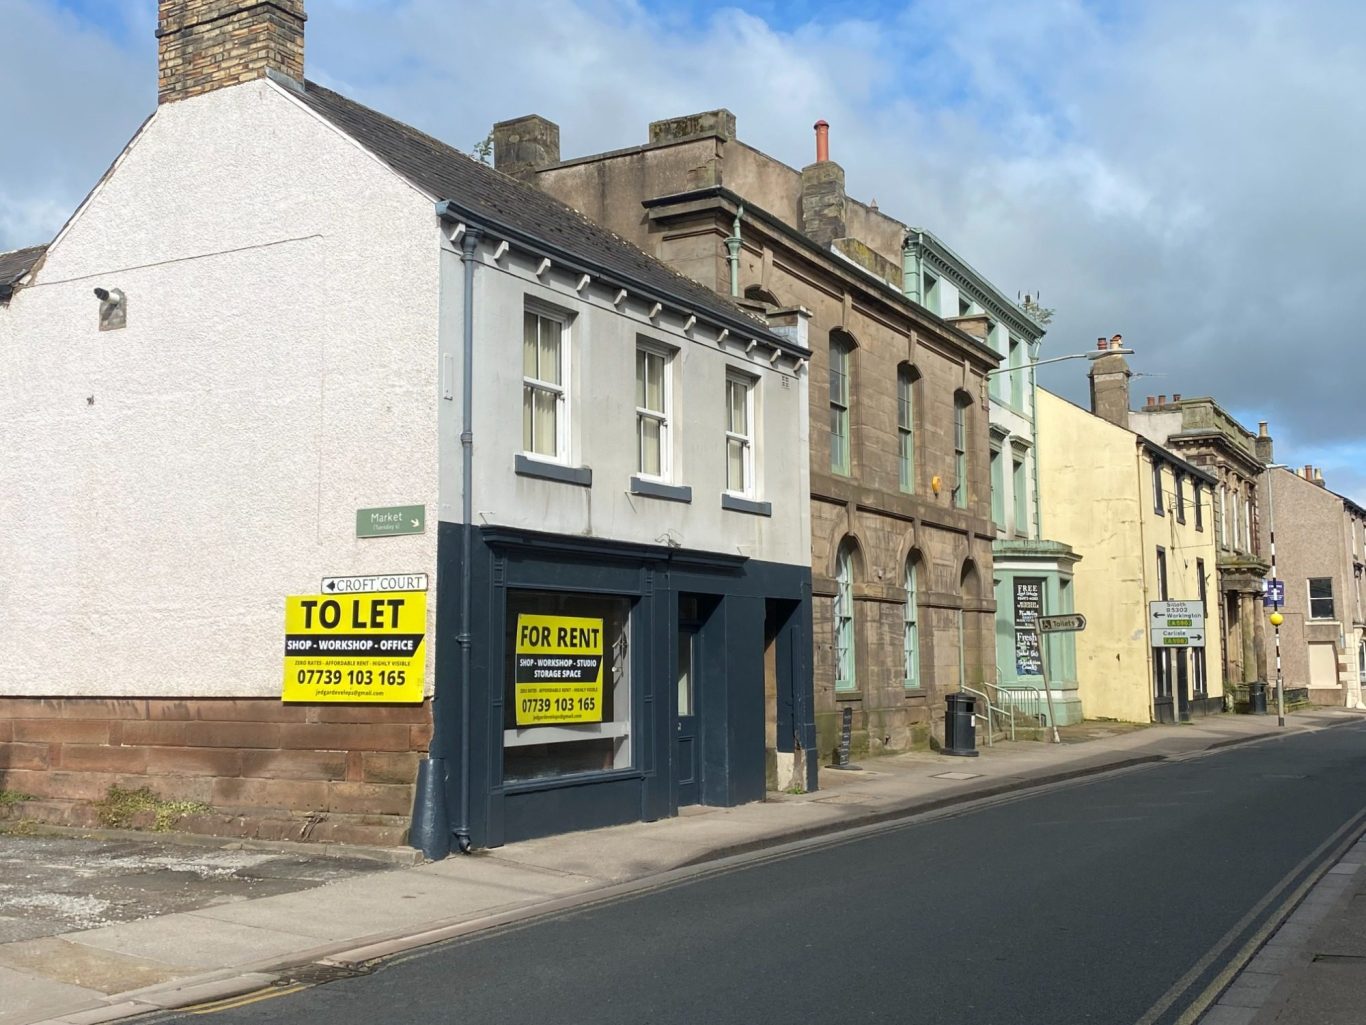 retail shop on High Street, Wigton, Cumbria for rent